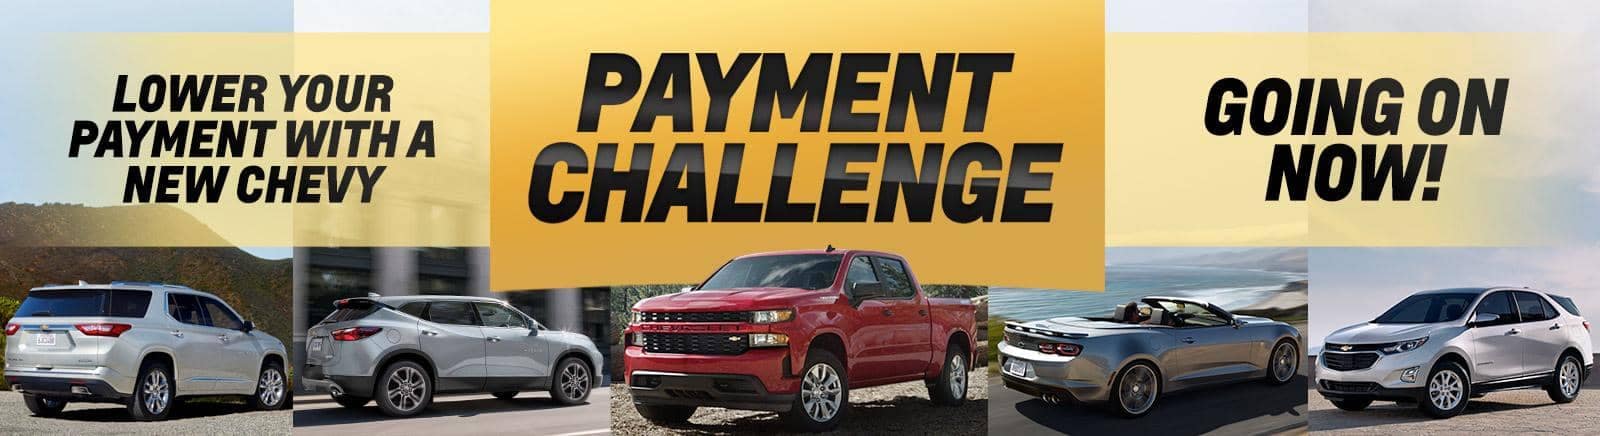 payment challenge